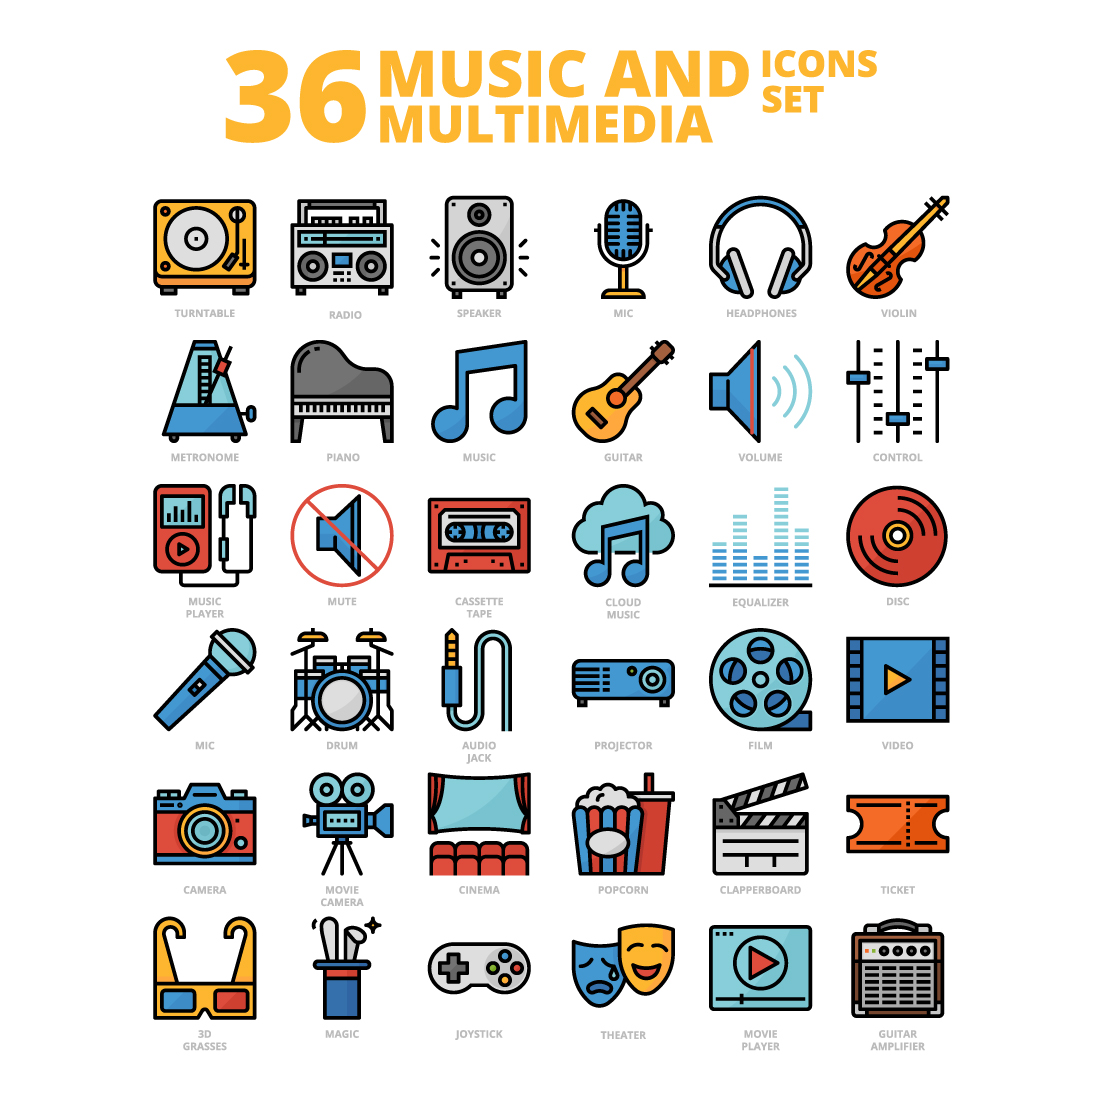 36 Music and Multimedia Icons Set x 4 Styles cover image.